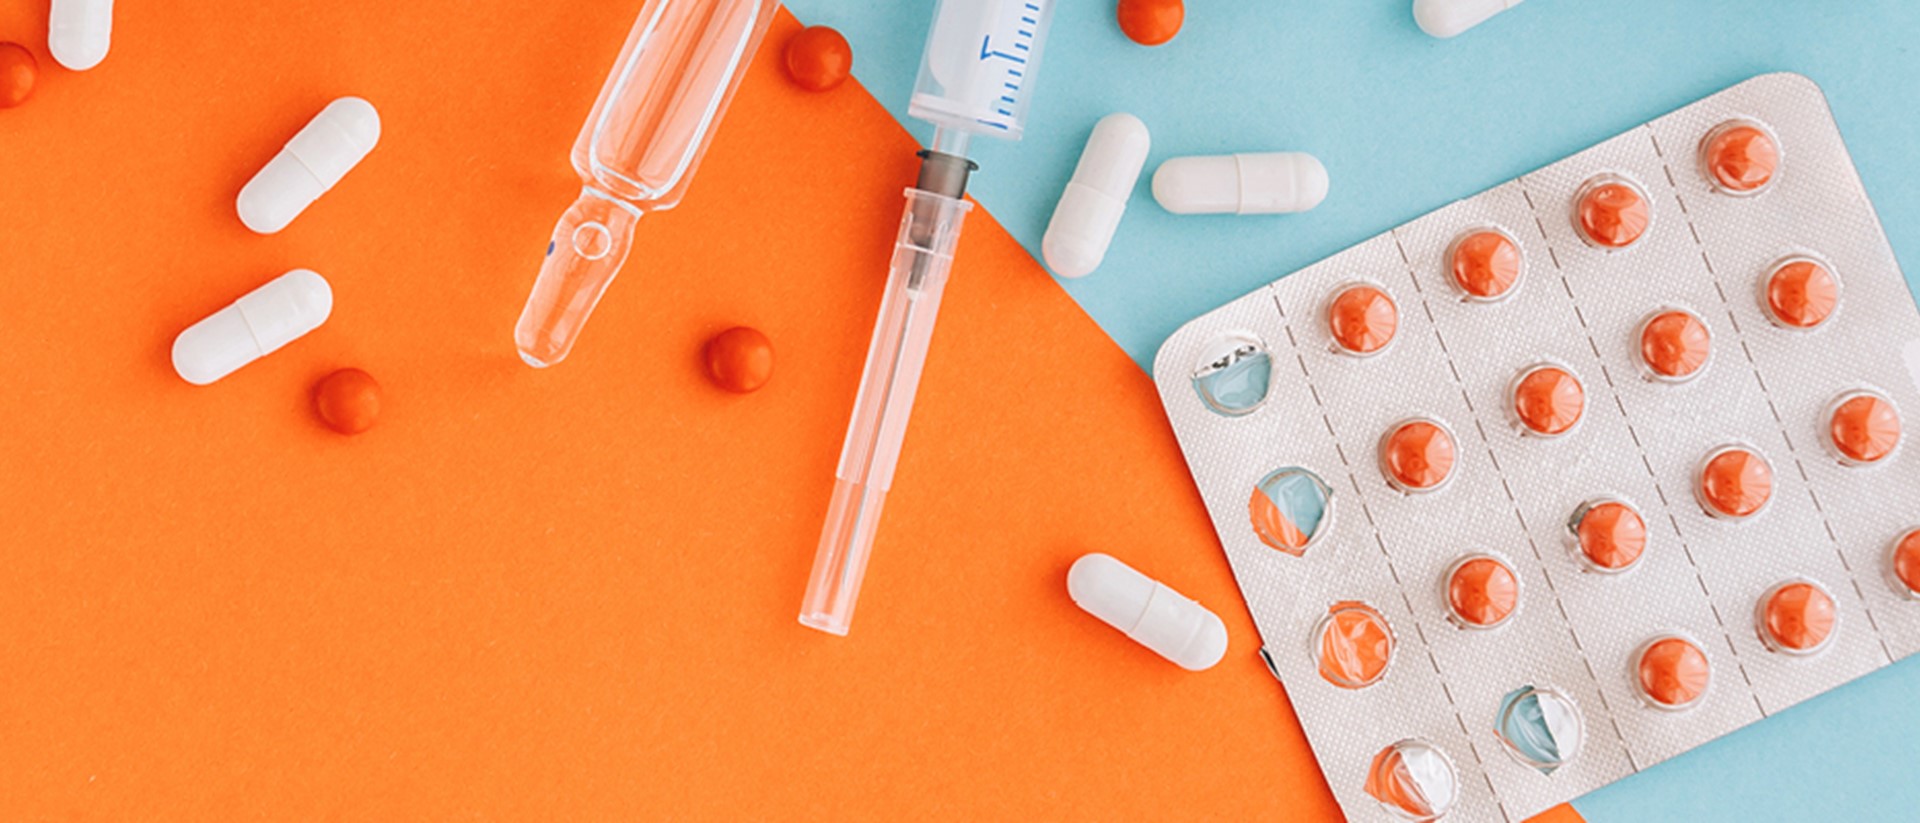 Image of syringes and pills on an orange and teal background